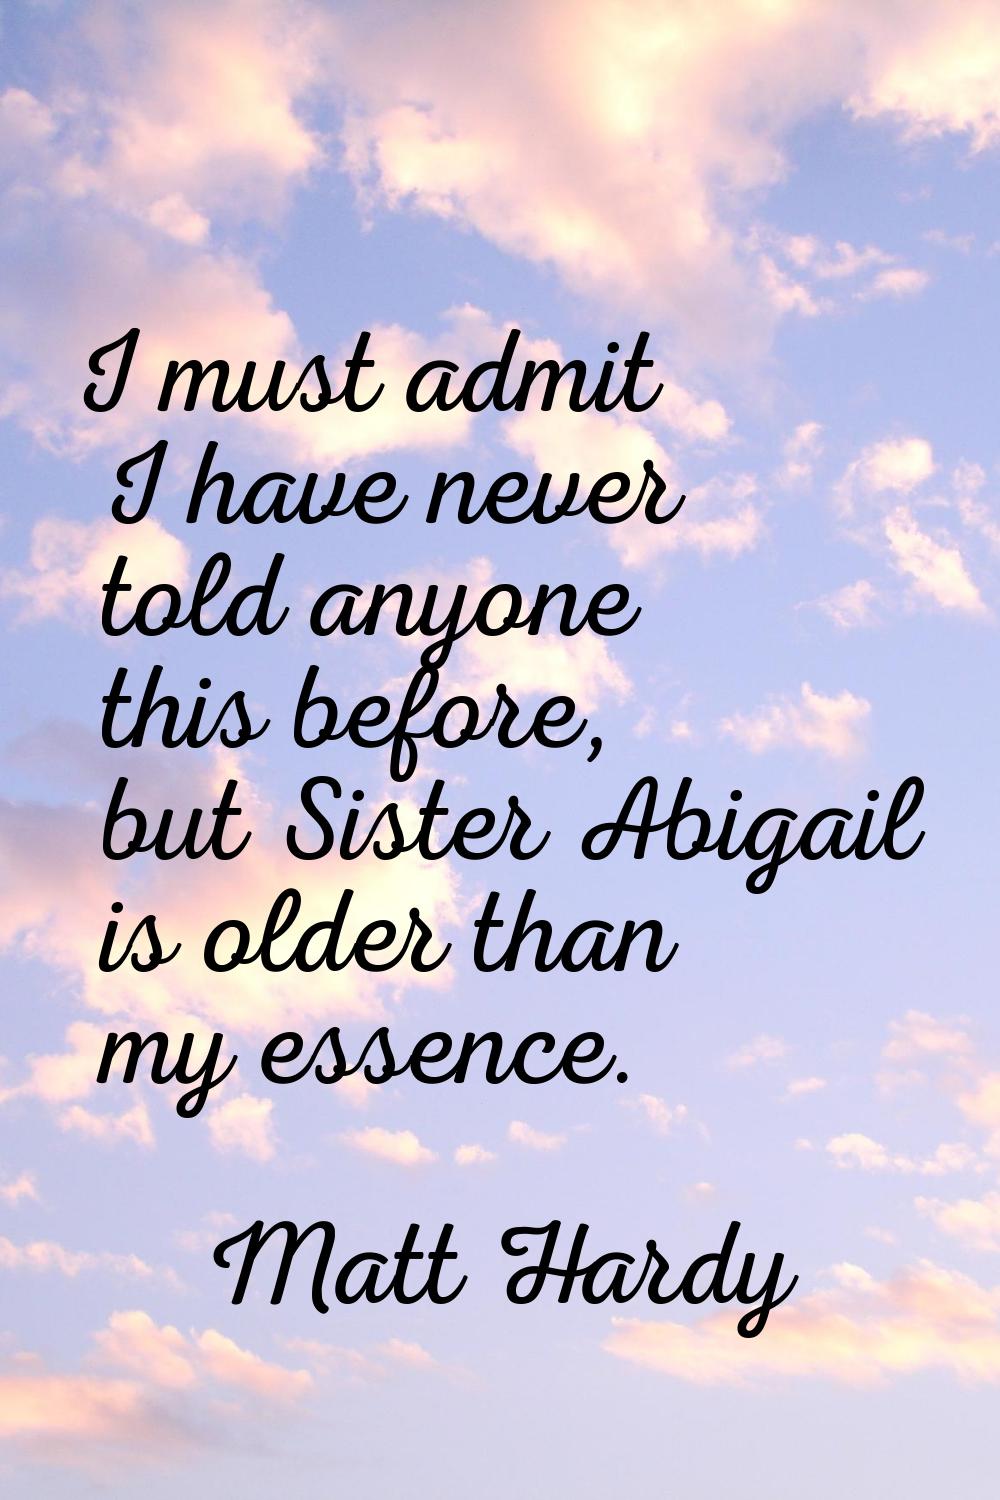 I must admit I have never told anyone this before, but Sister Abigail is older than my essence.